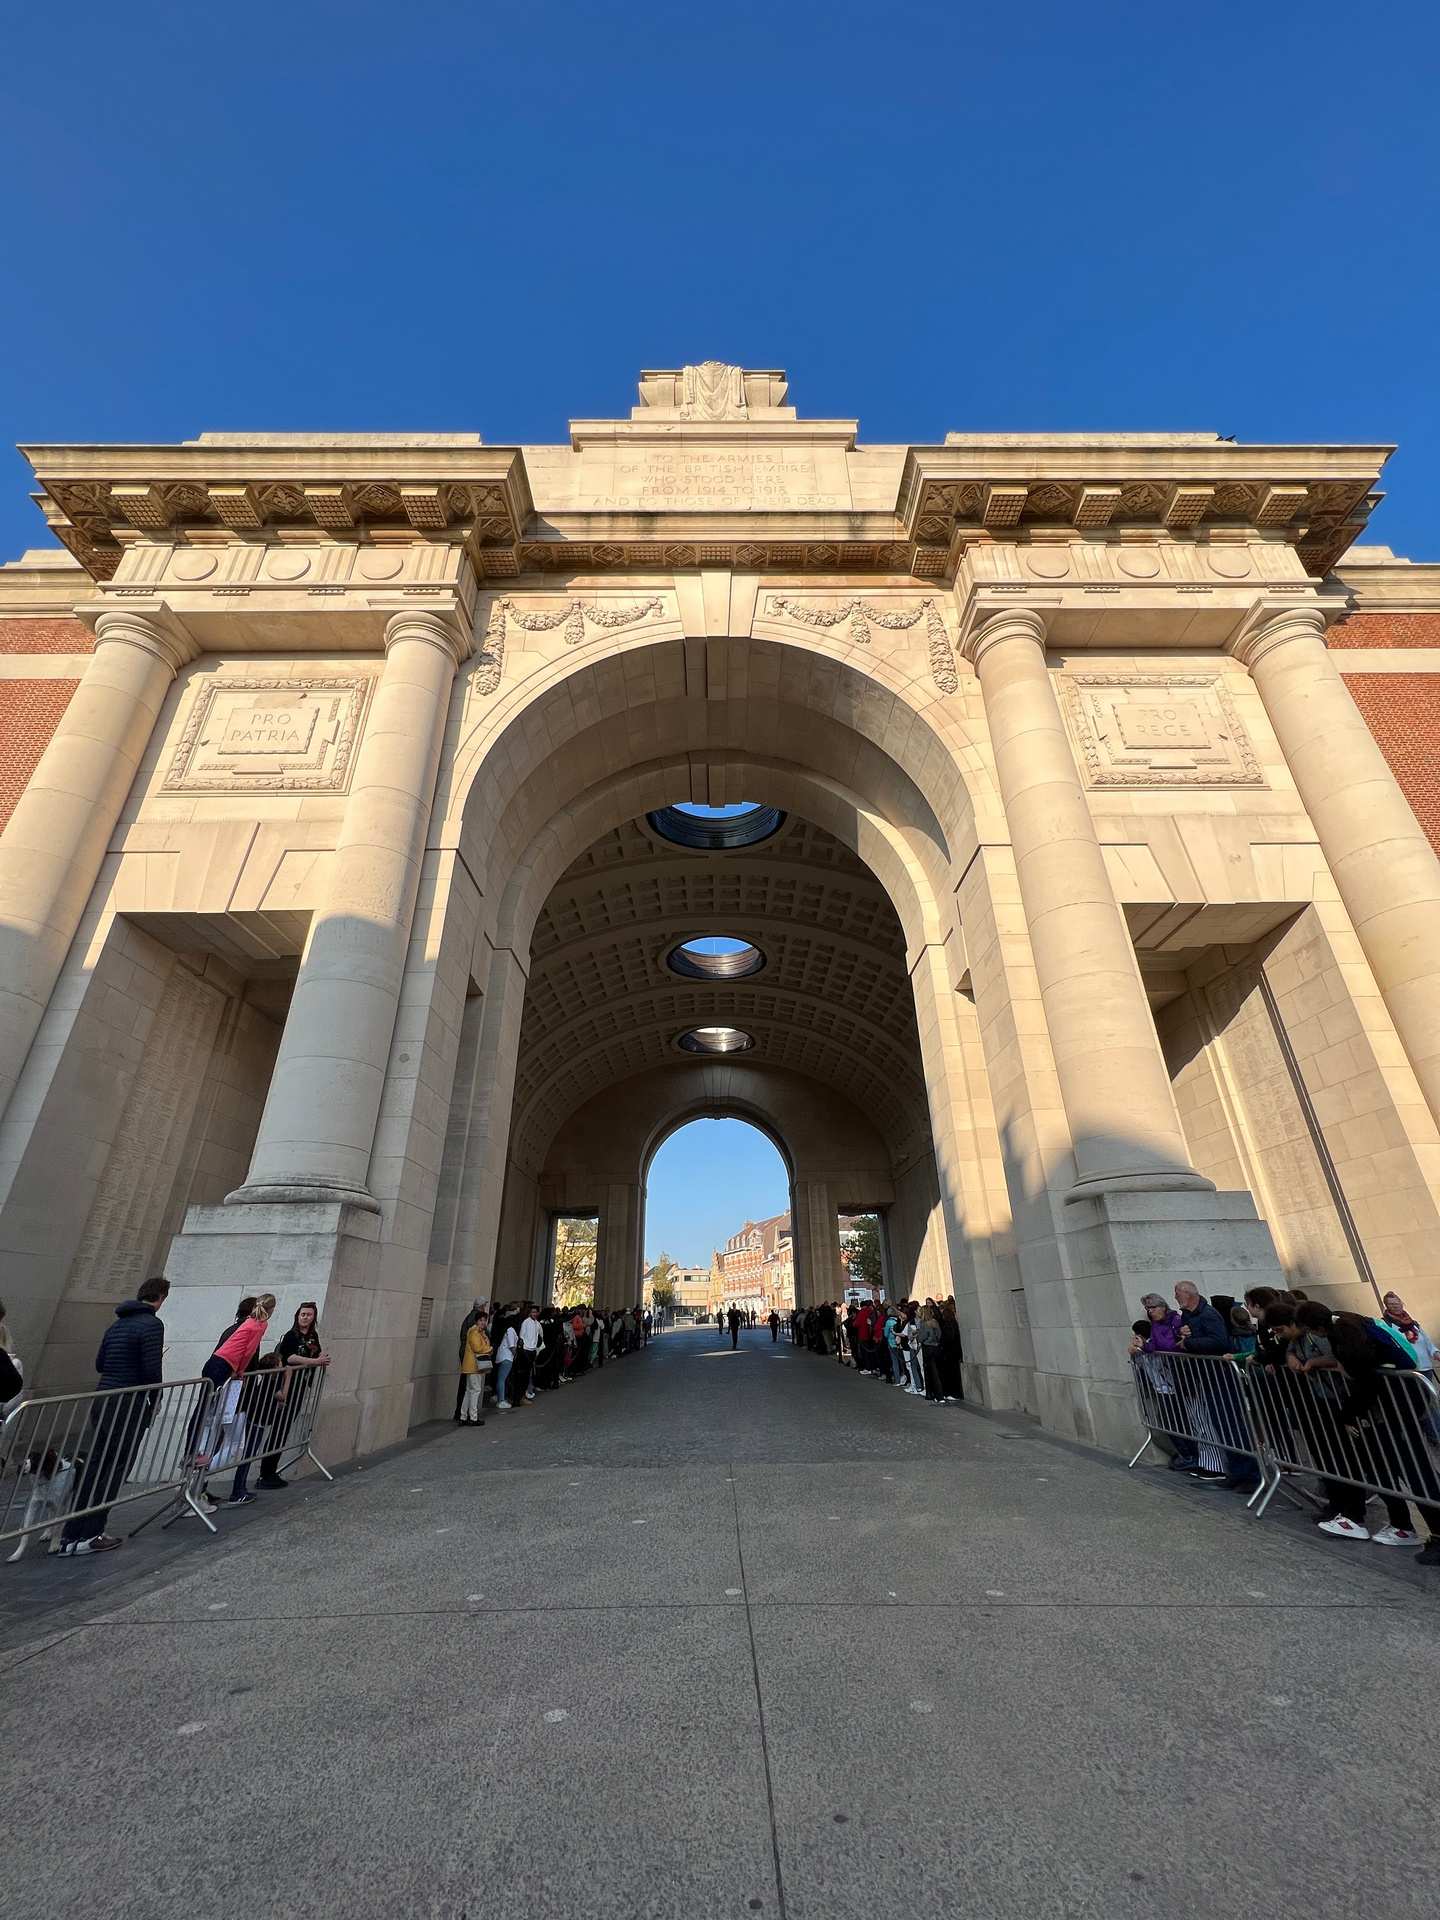 People attending ceremony in Menin Gate, Belgium. The escape of Dunkirk